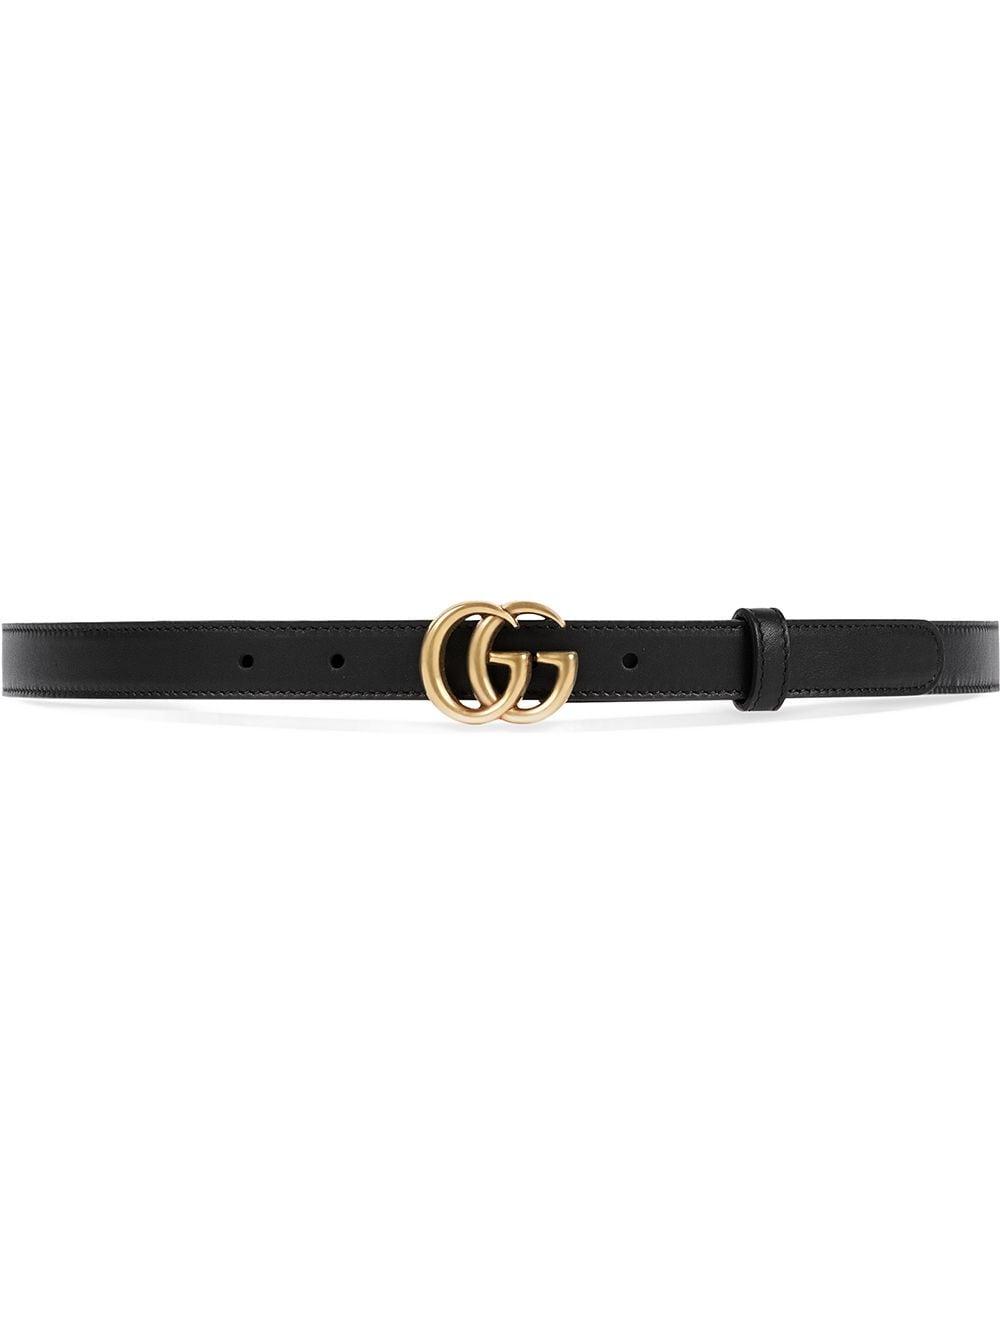 Gucci Leather Belt With Double G Buckle in Black | Lyst